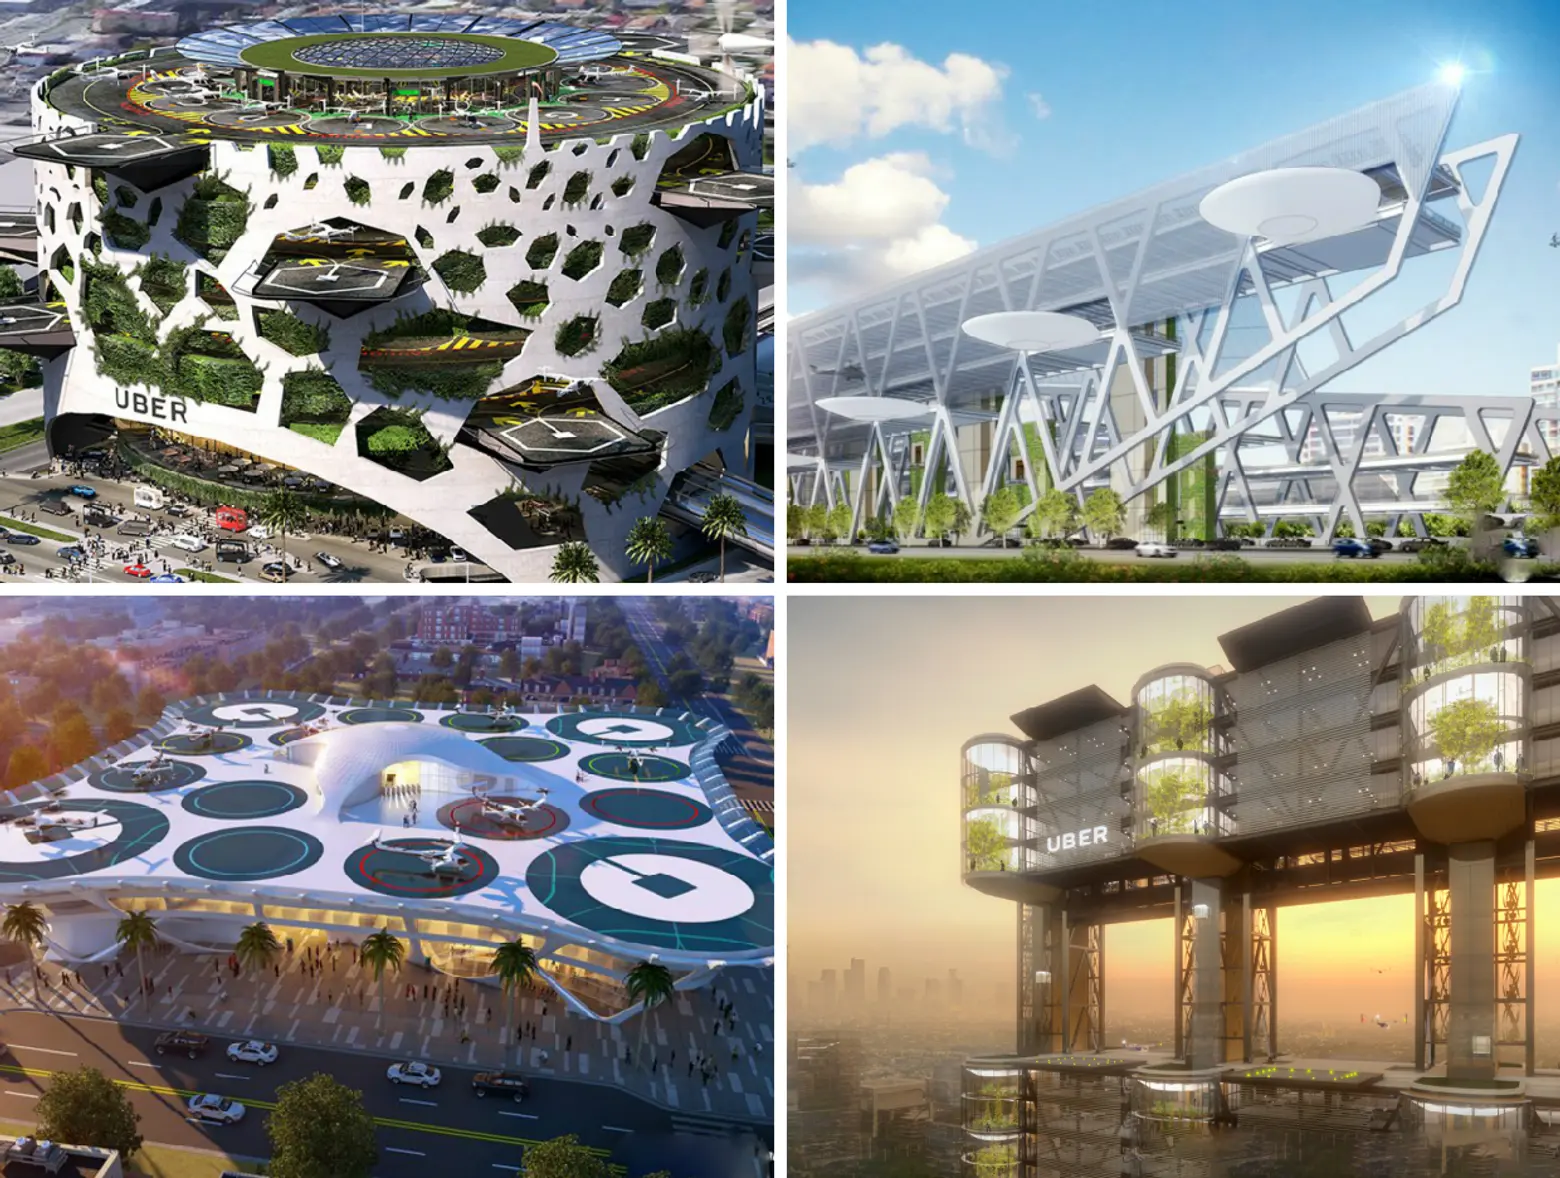 Six futuristic Skyport concepts revealed for flying Ubers